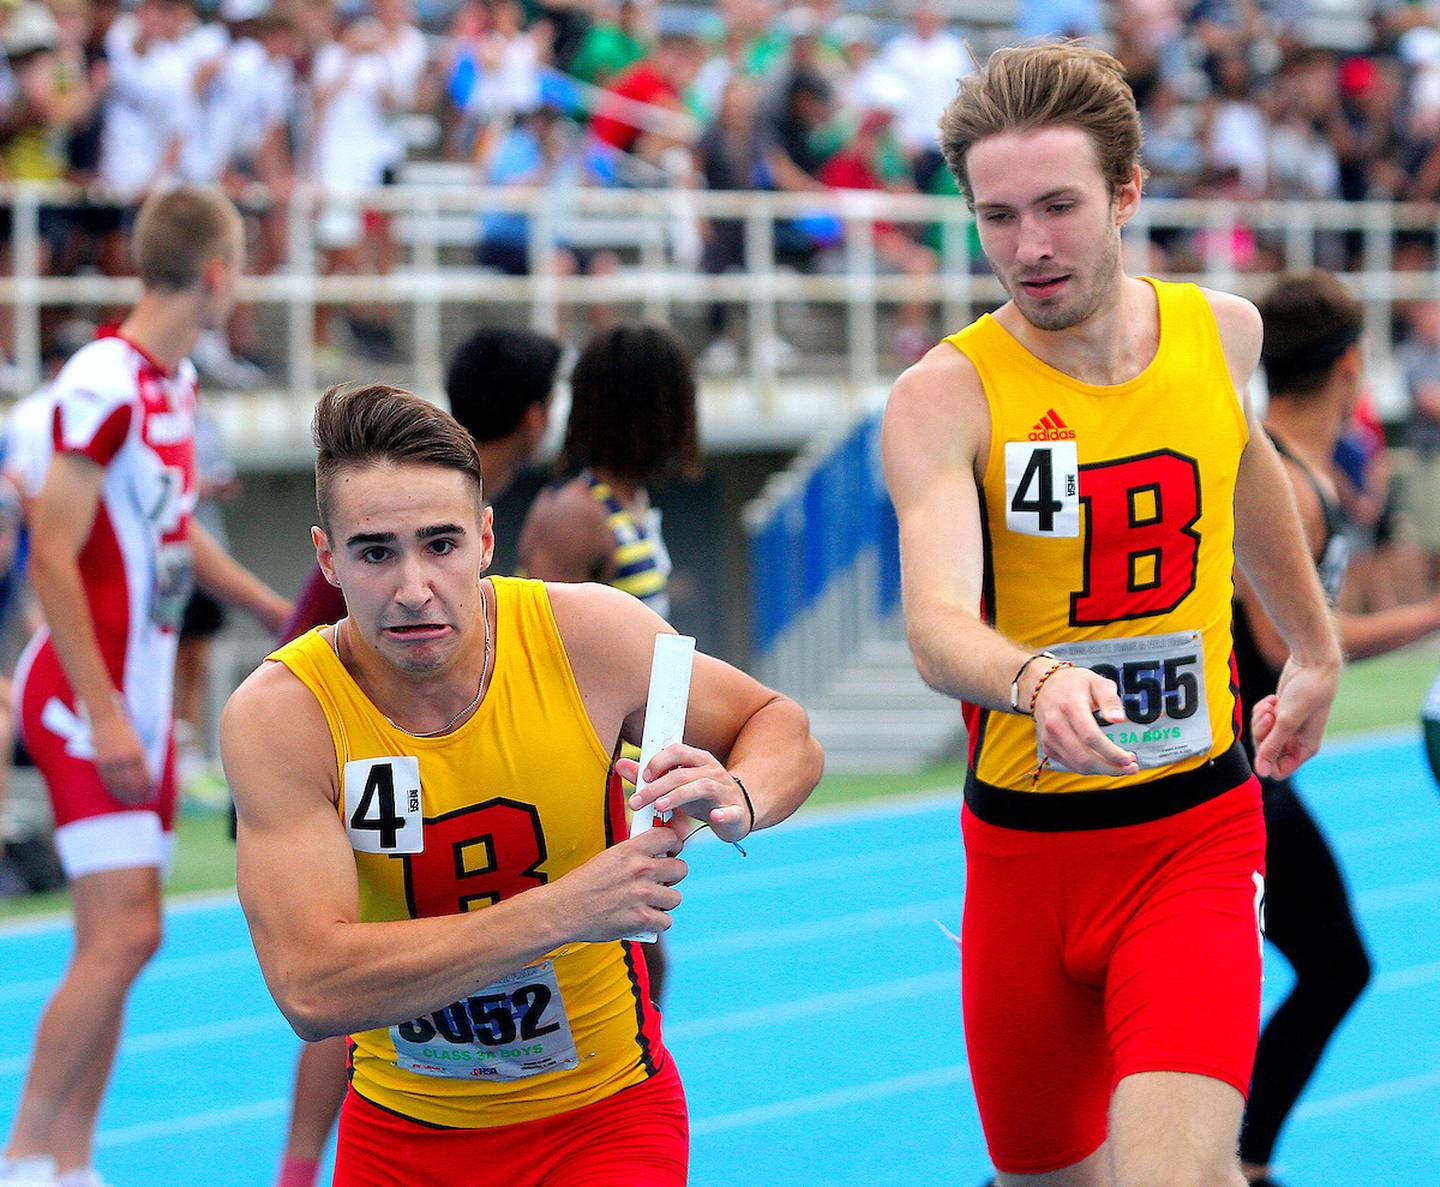 June 19, 2021 - Charleston, Illinois - Anthony Bradley takes the baton from teammate Batavia's Jonah Fallon while running in the Class 3A 4x400-Meter Relay at the Illinois High School Association Track & Field State Finals on Friday